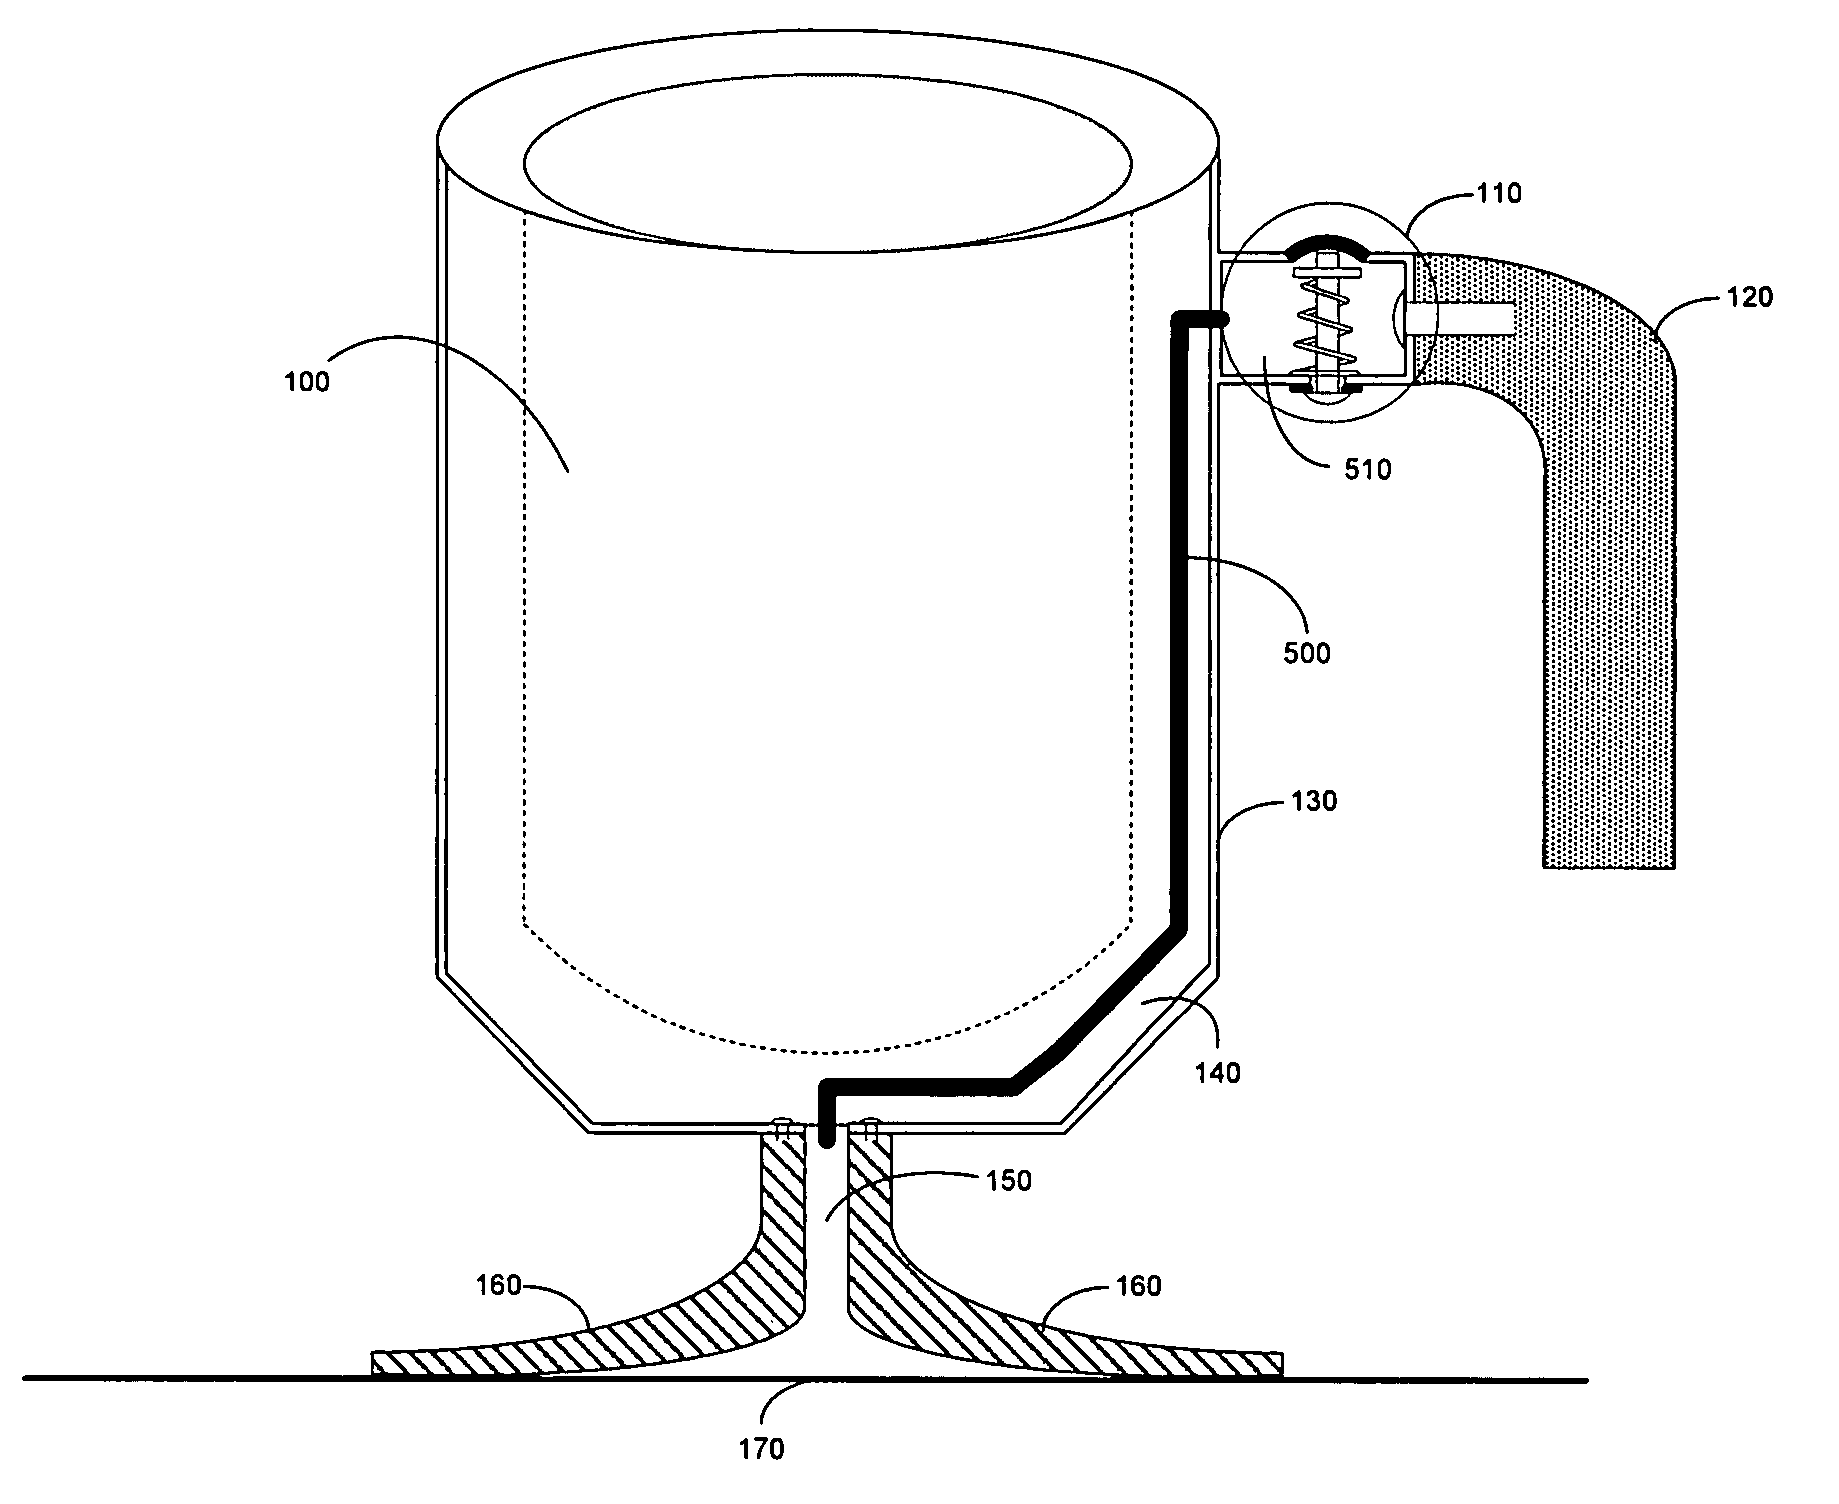 Liquid holding device with releasable suction base